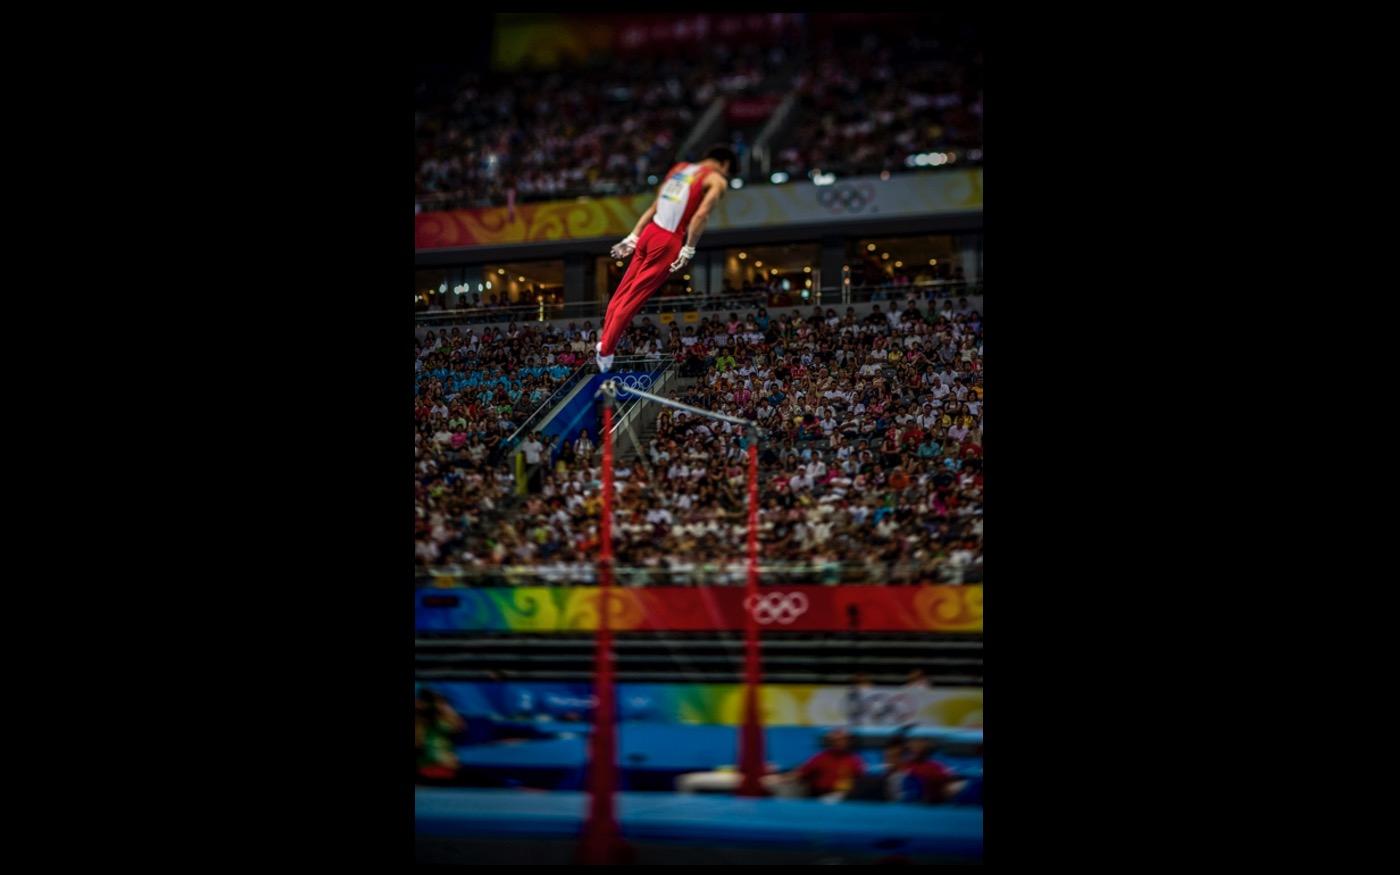 Aloft, and going up, a Gymnast at the 2008 Beijing Olympics : Looking Back: 60 Years of Photographs : David Burnett | Photographer